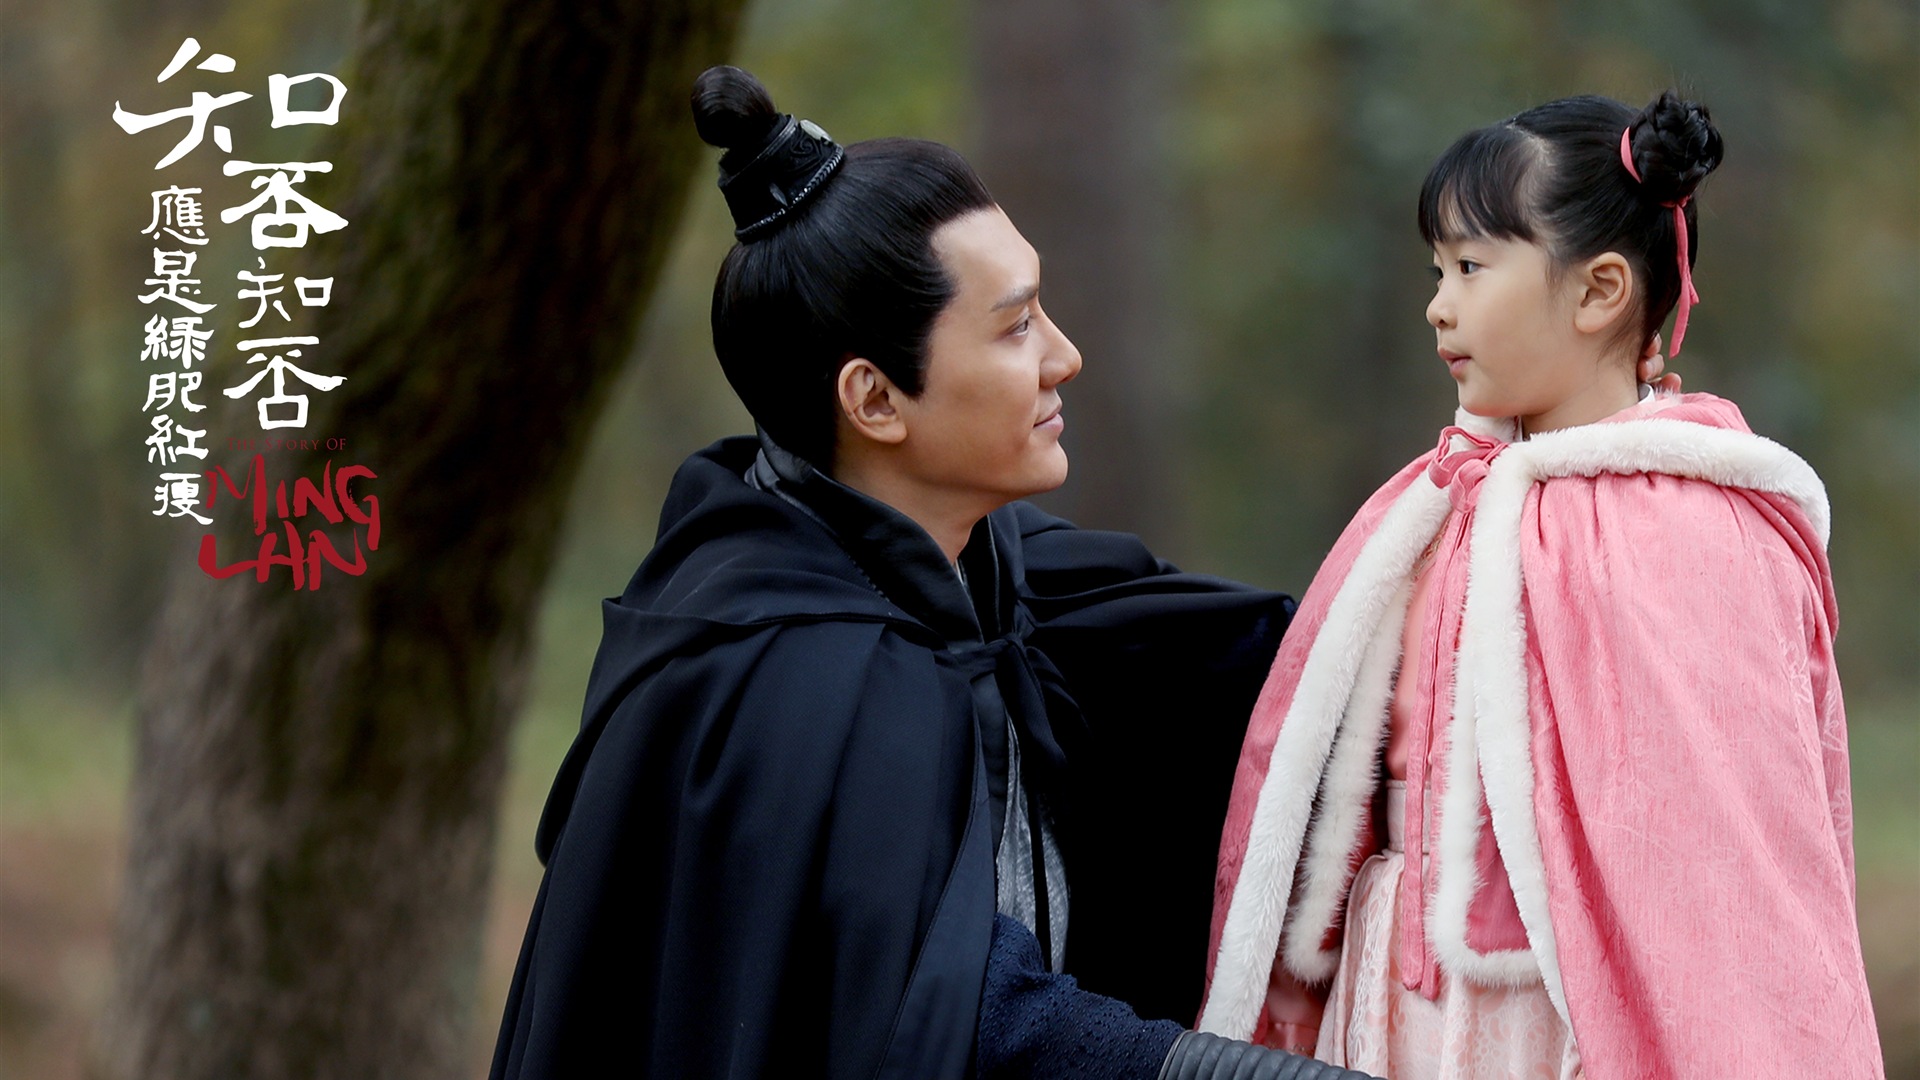 The Story Of MingLan, TV series HD wallpapers #21 - 1920x1080